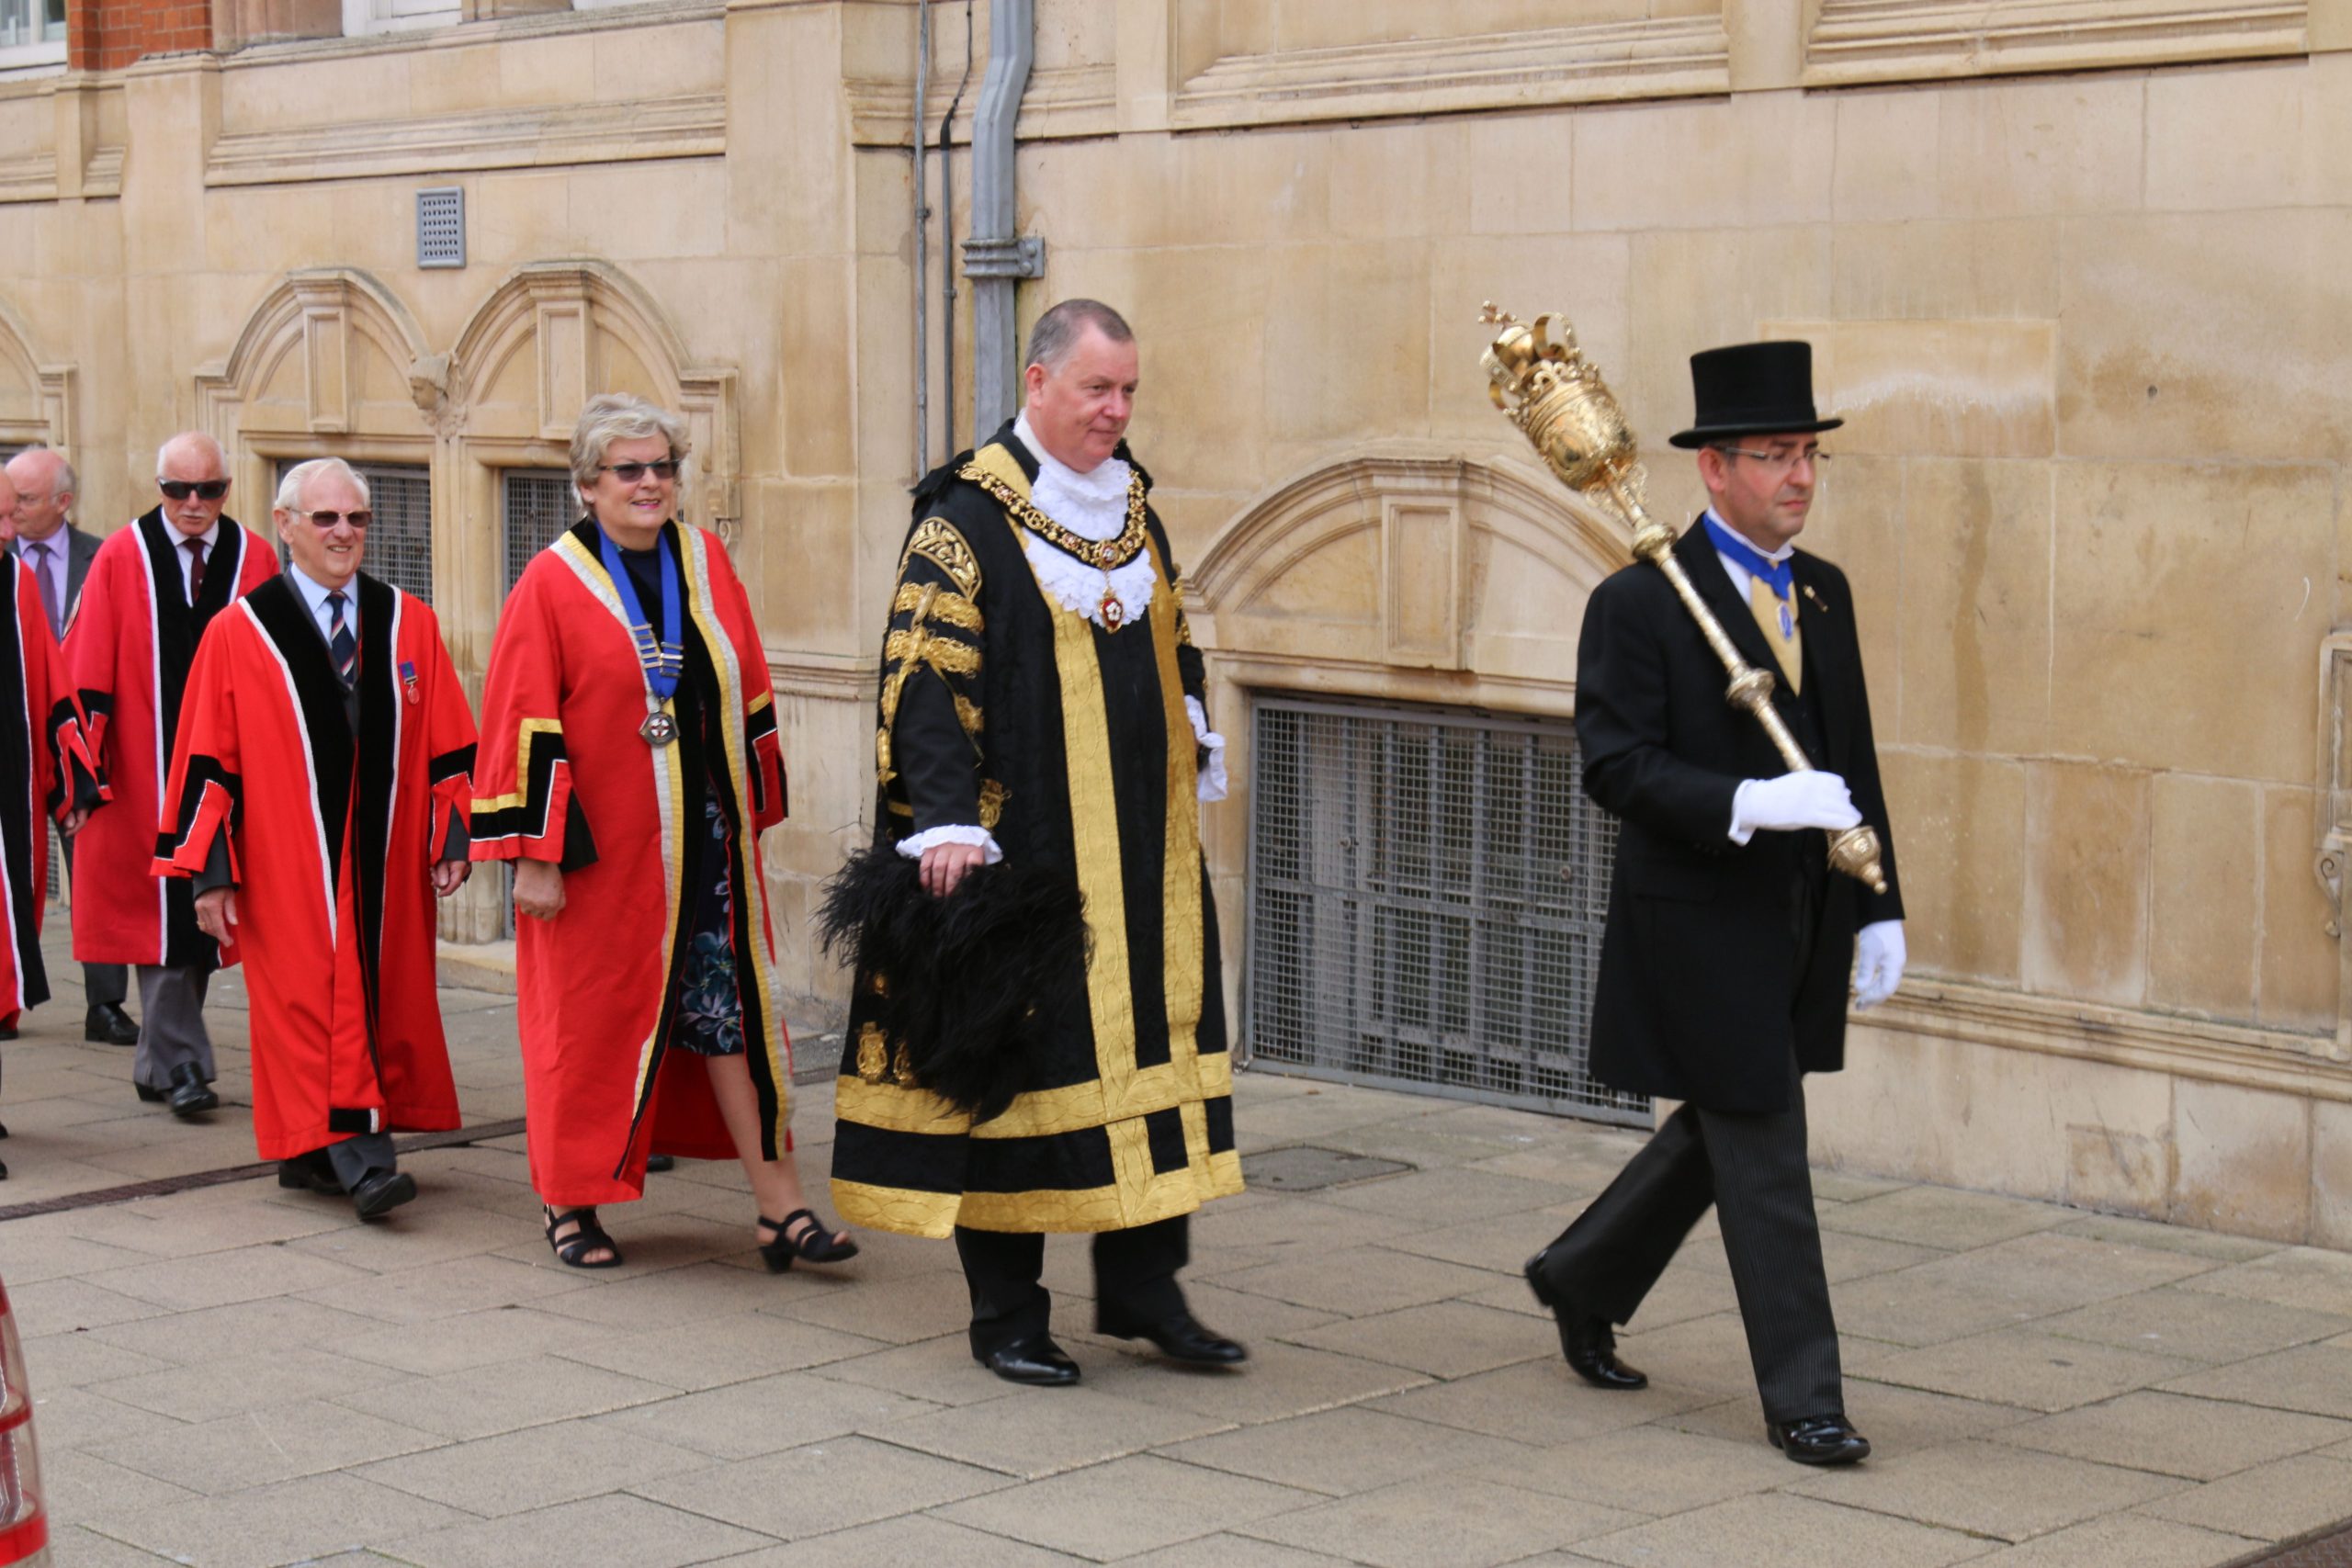 Macebearer and Civic Officer Peter Legg leads the Lord Mayor of the City of Leicester in a procession from the Town Hall